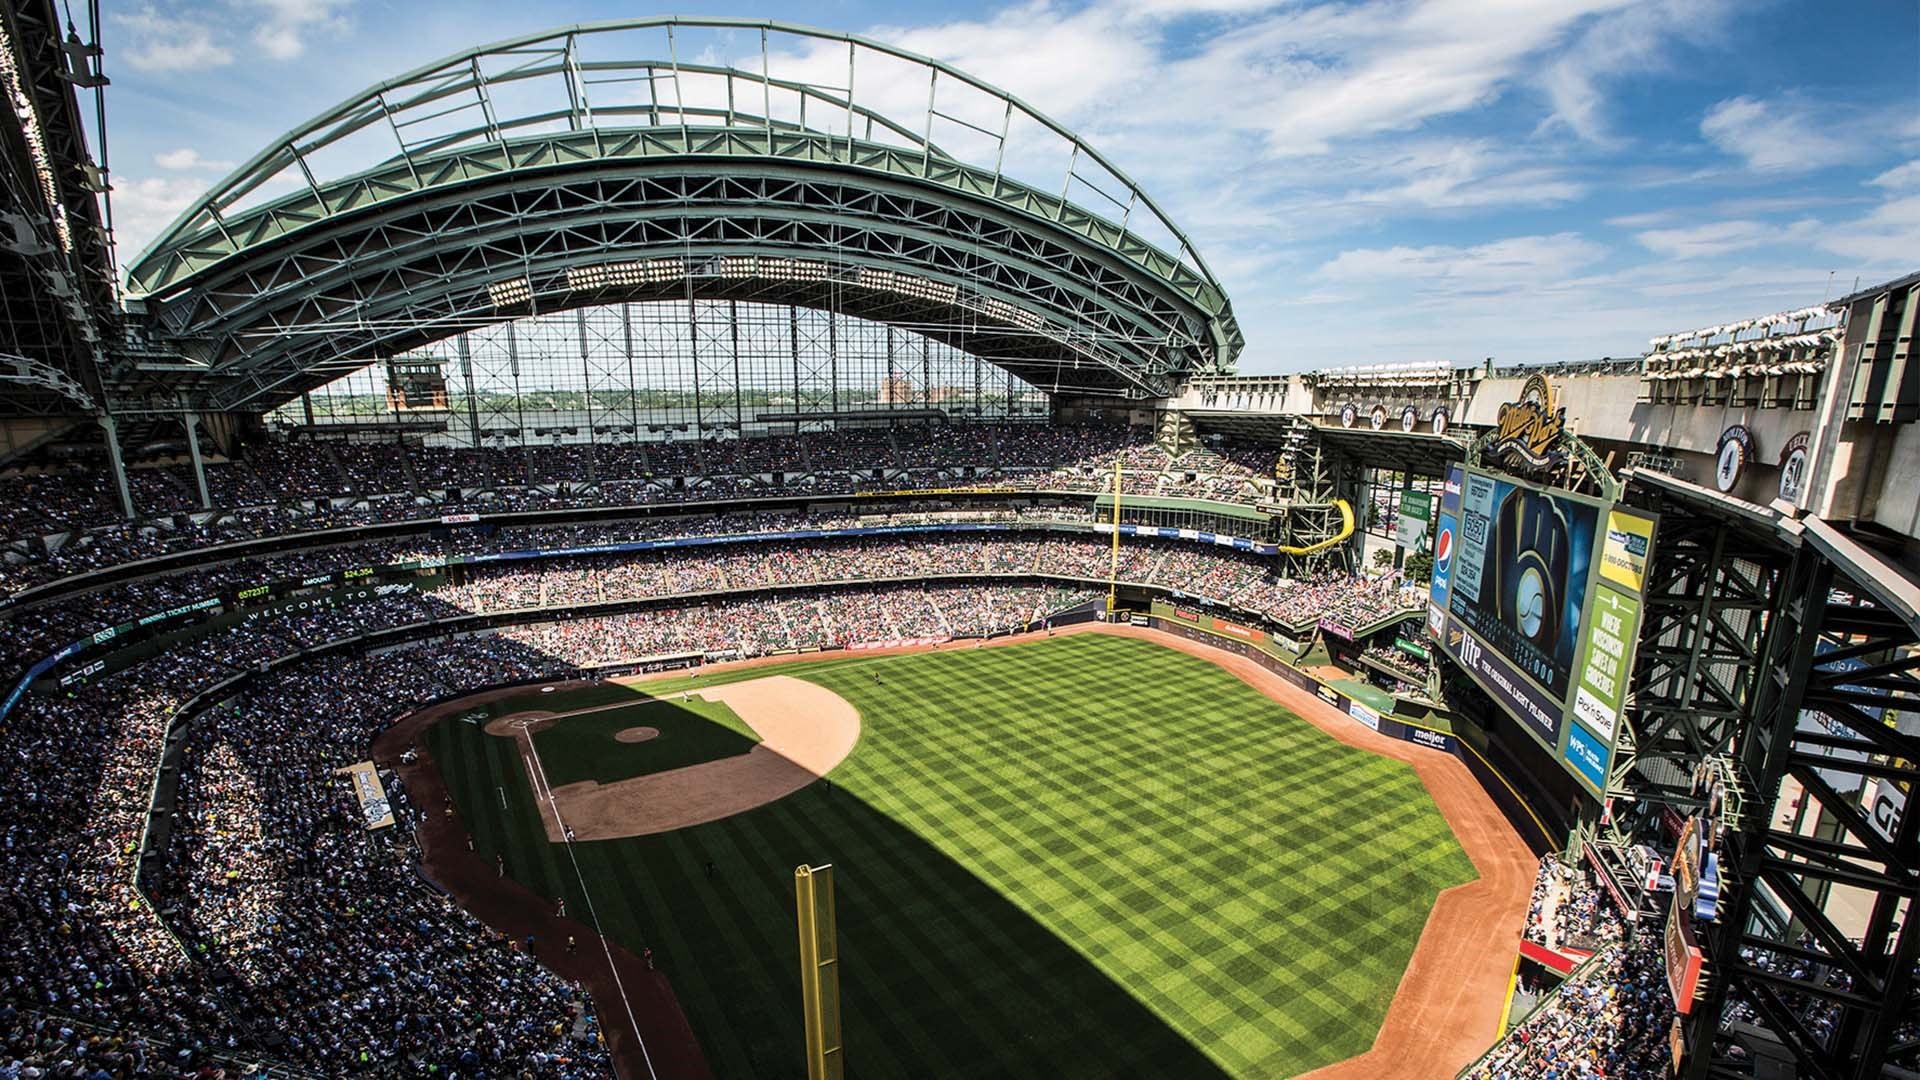 Milwaukee Brewers Stadium Wallpaper HD With high-resolution 1920X1080 pixel. You can use this wallpaper for Mac Desktop Wallpaper, Laptop Screensavers, Android Wallpapers, Tablet or iPhone Home Screen and another mobile phone device